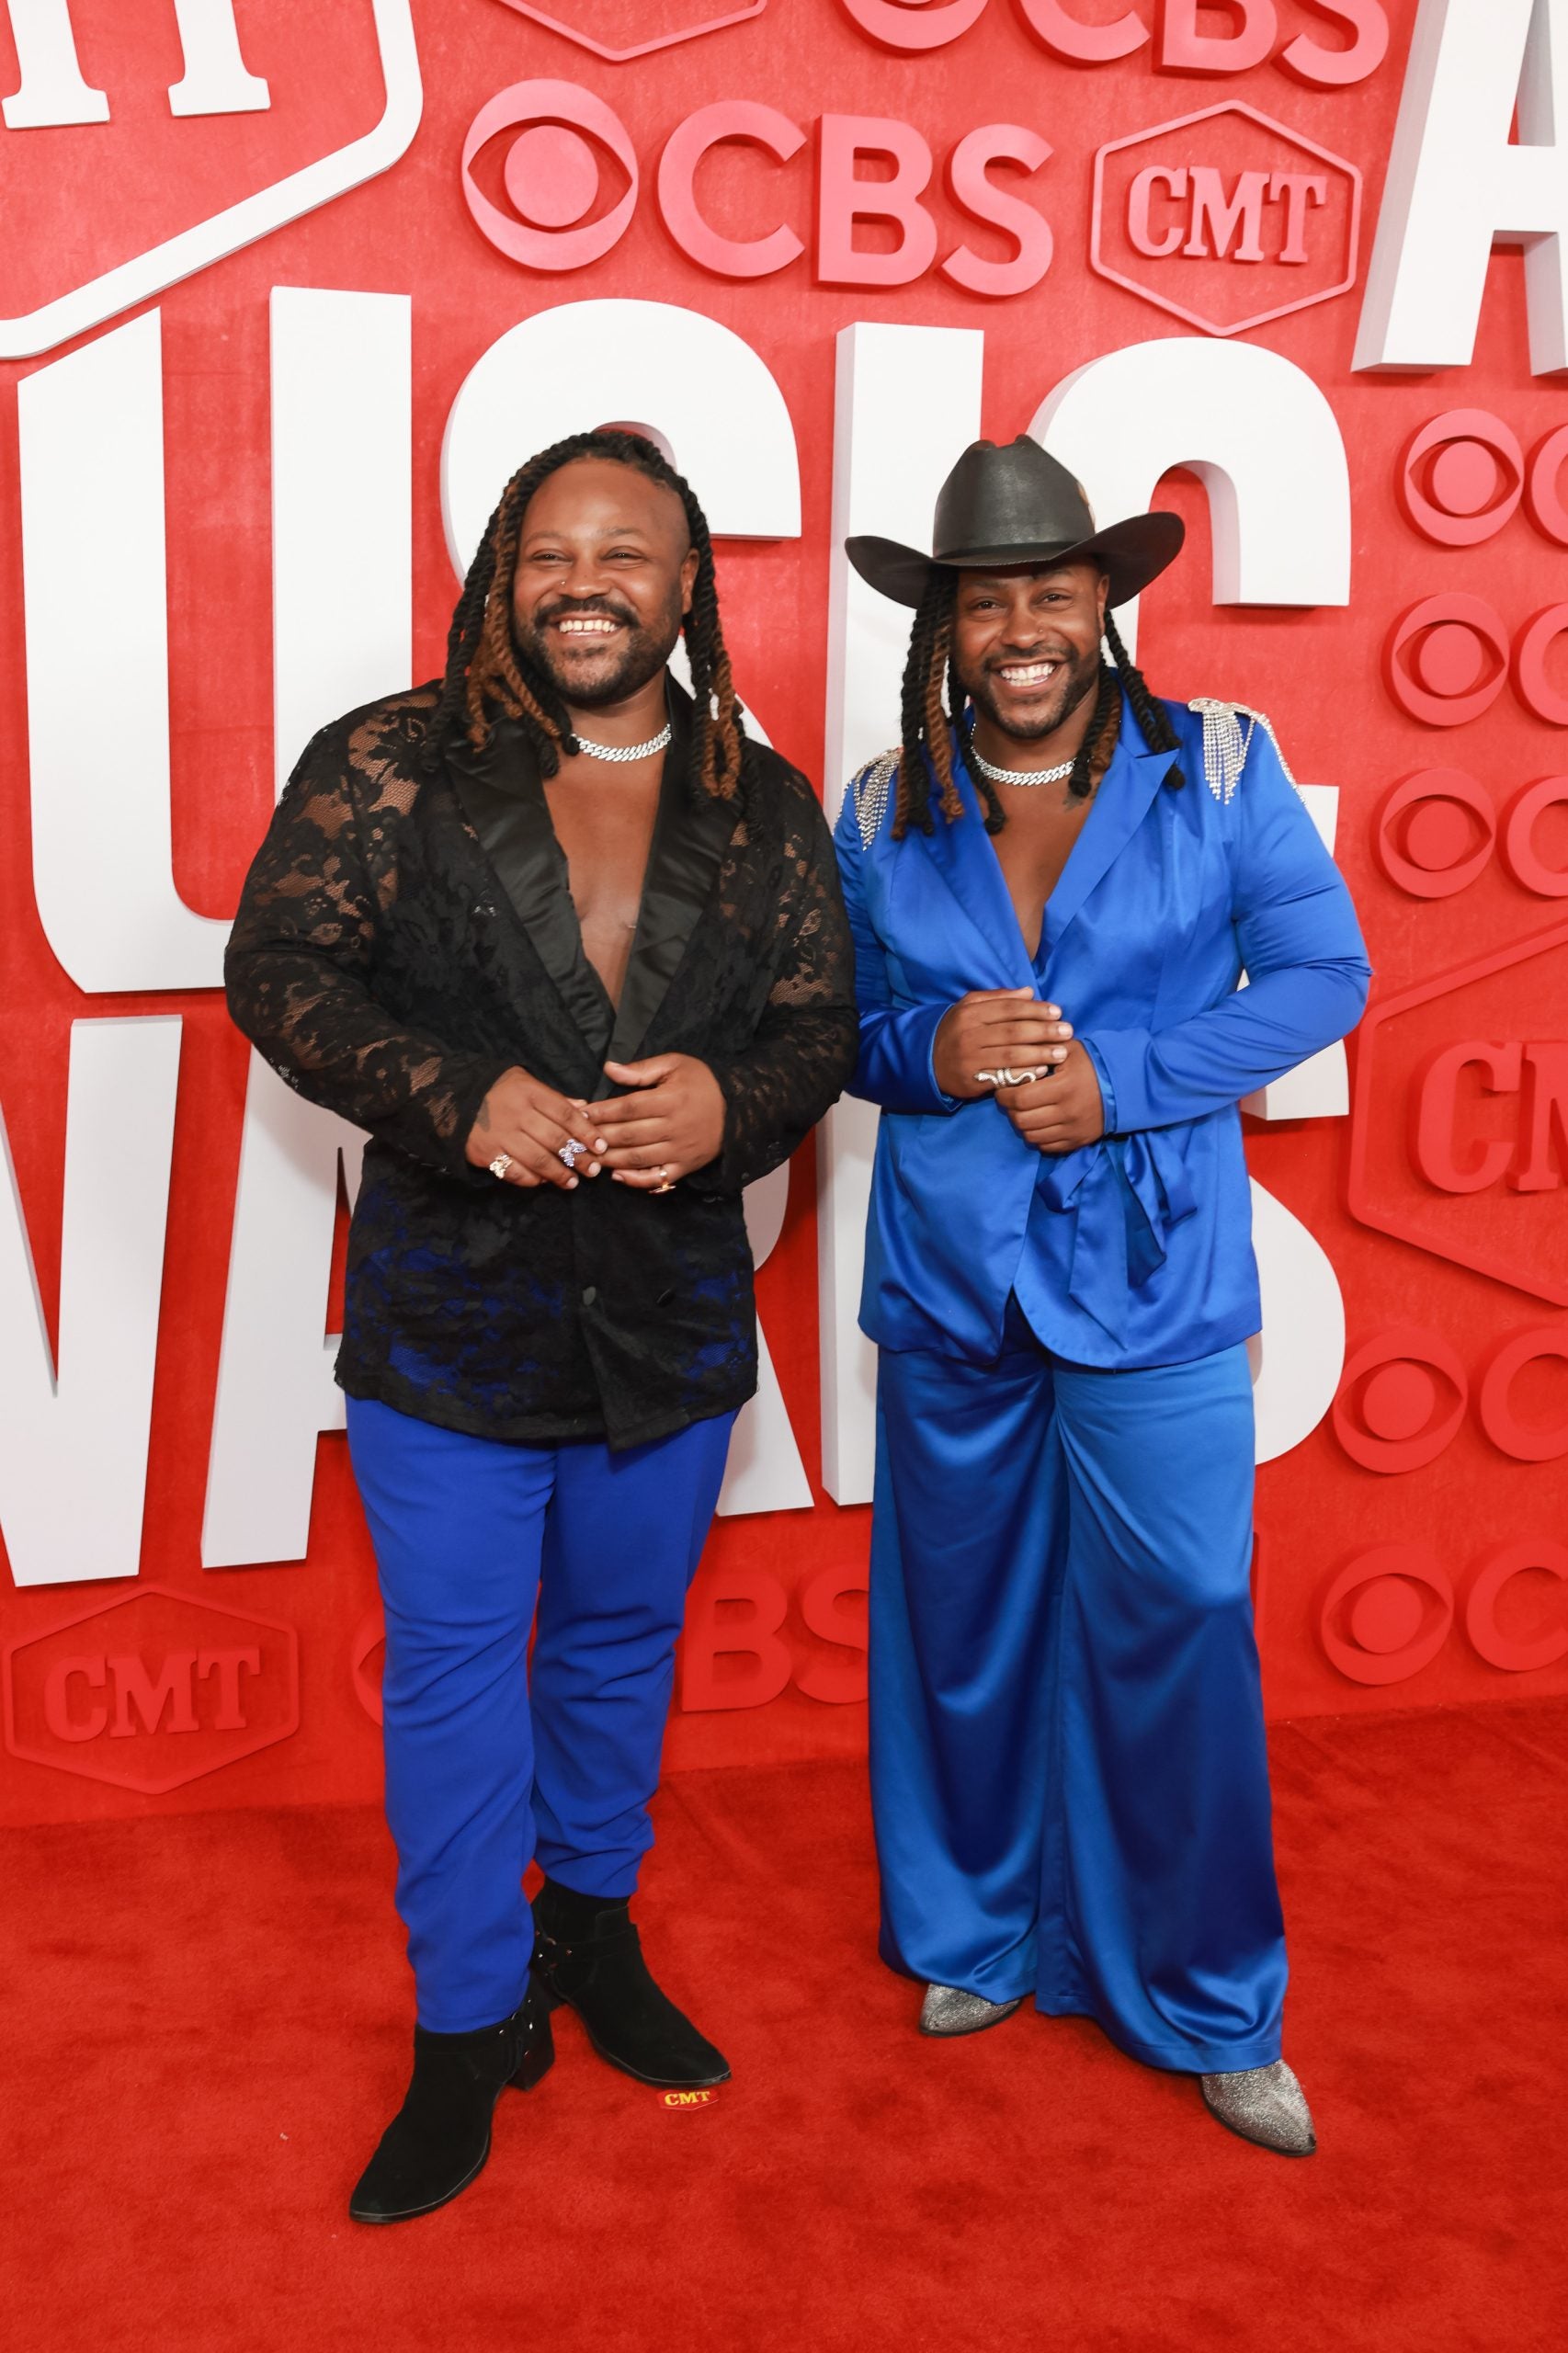 The Best Red Carpet Looks At The CMT Music Awards
